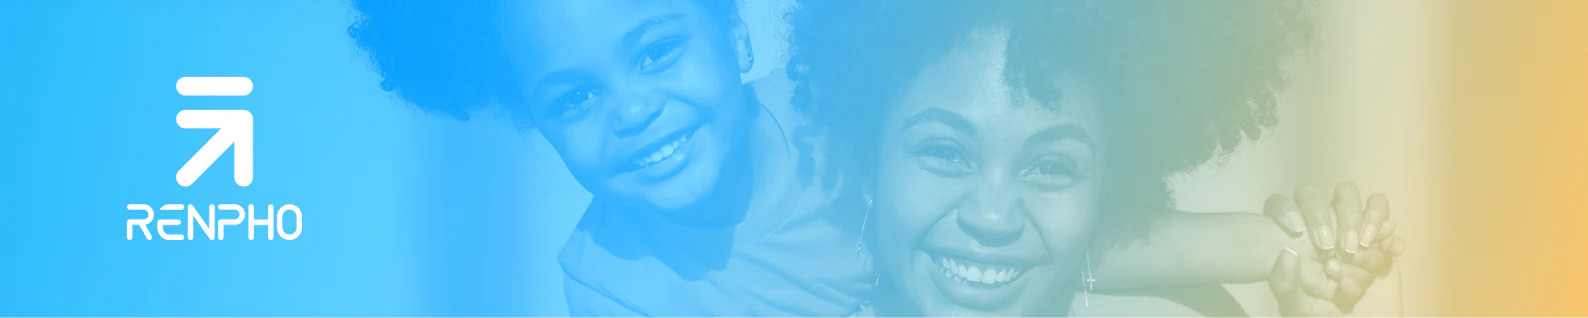 Mother and child smiling, with a colorful blue and yellow gradient background, and the renpho logo on the left.